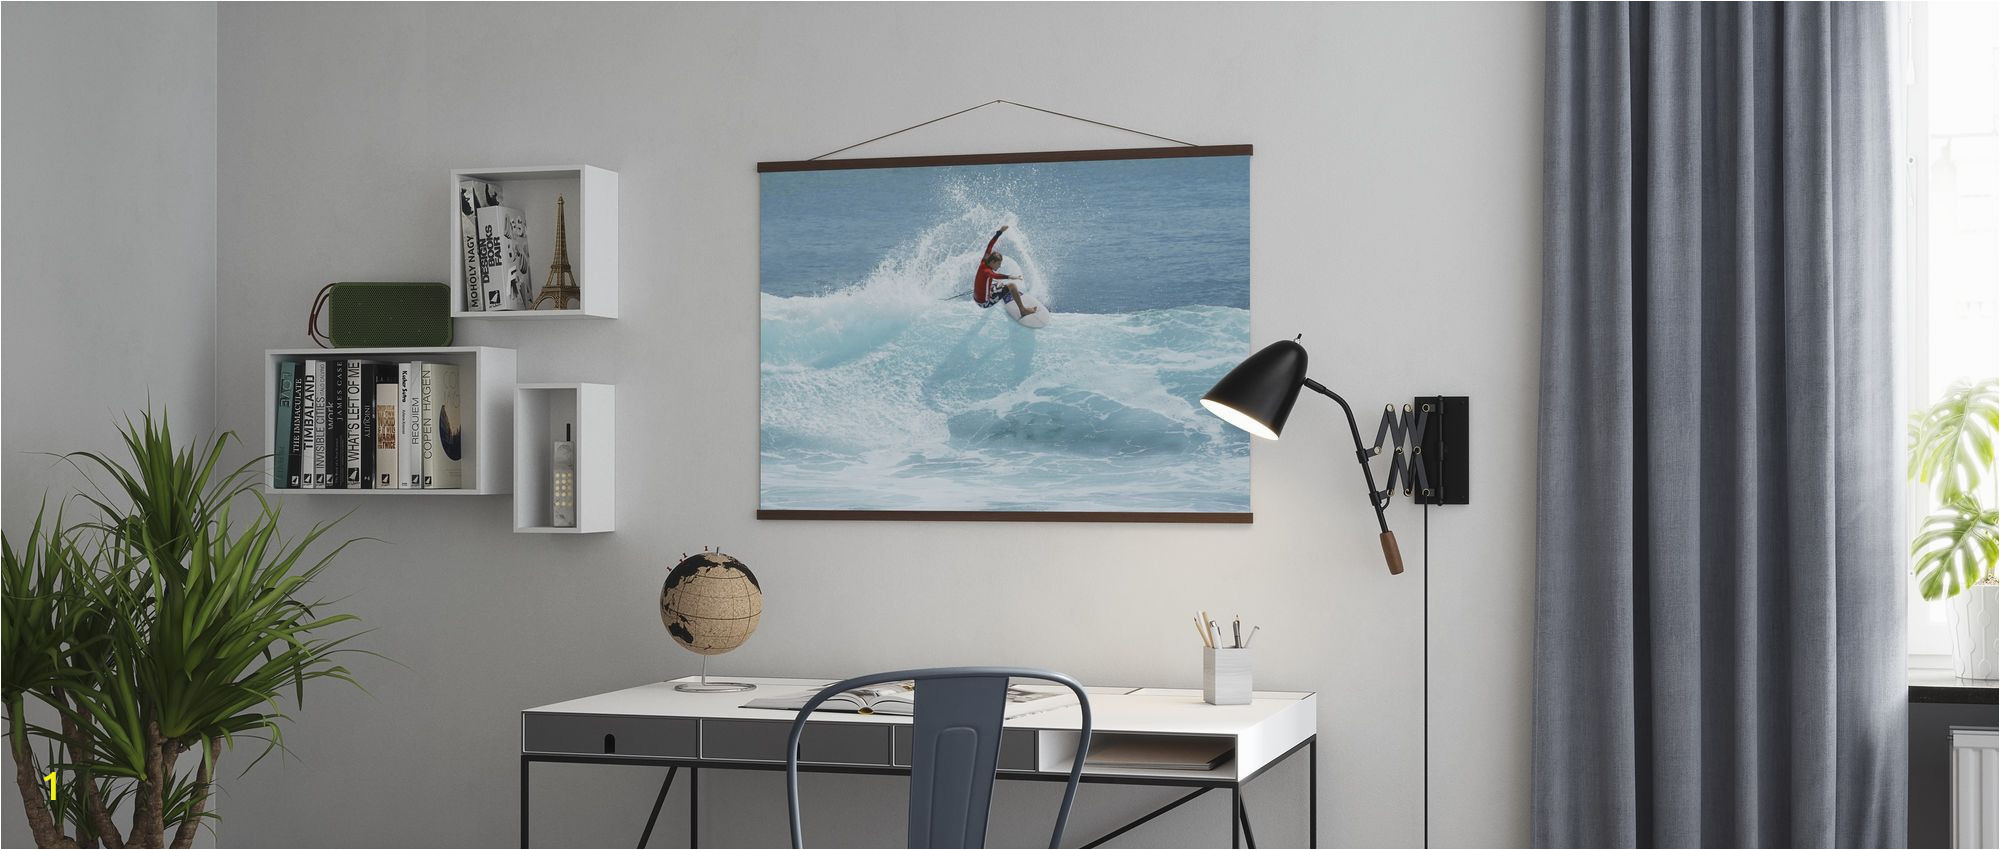 Surf Wave Wall Mural Surfer Carving top Of Wave Evocative Poster Wall